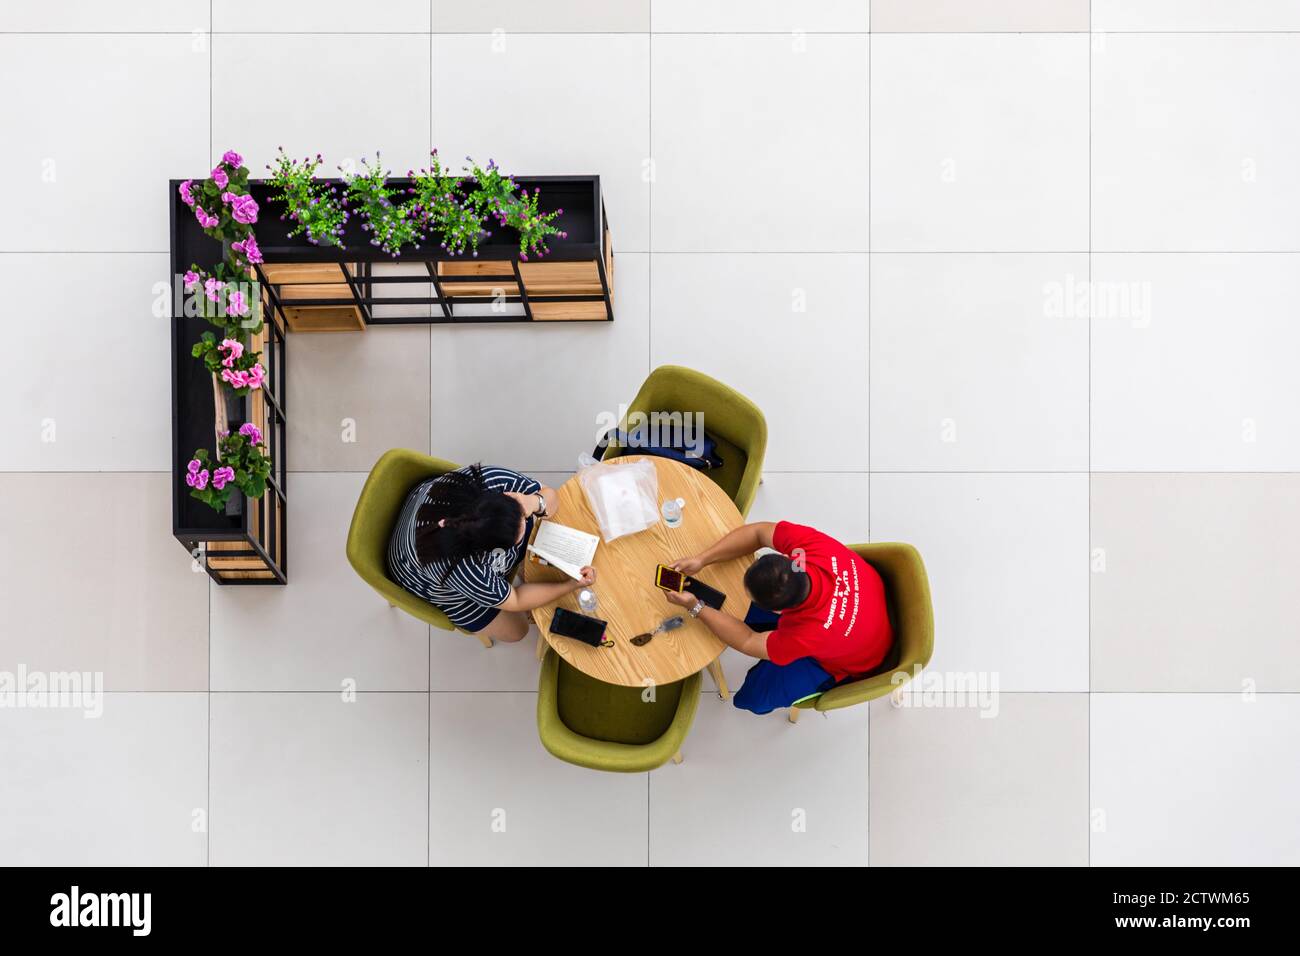 Kota Kinabalu, Sabah, Malaysia: Interior of Sabah Regional Library at Tanjung Aru Plaza, 2 people readying and using smartphone. View from above. Stock Photo